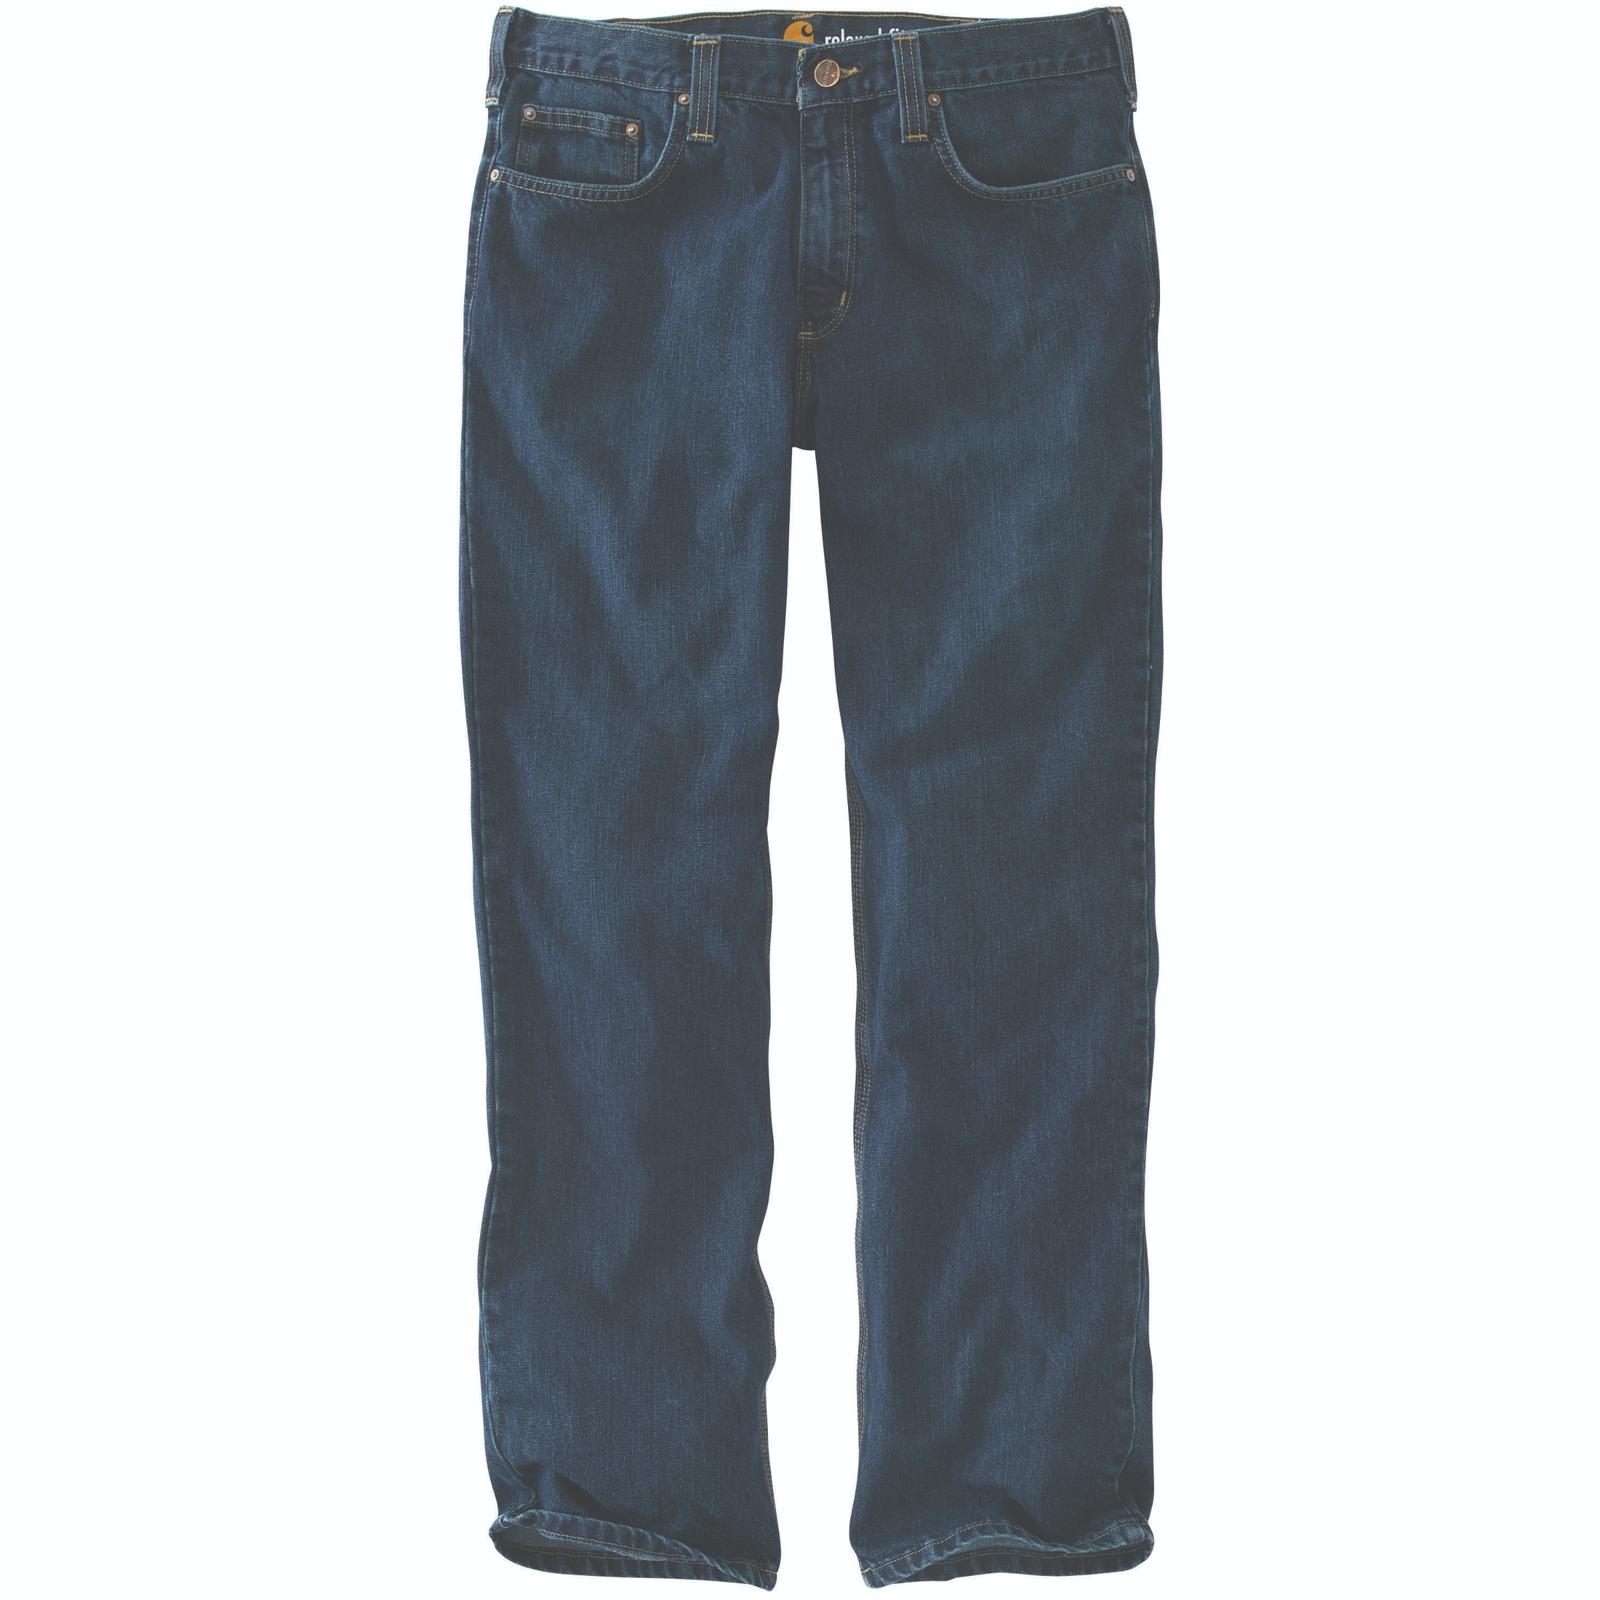 Carhartt Men's Relaxed Fit 5 Pocket Jeans in Frontier wash front view